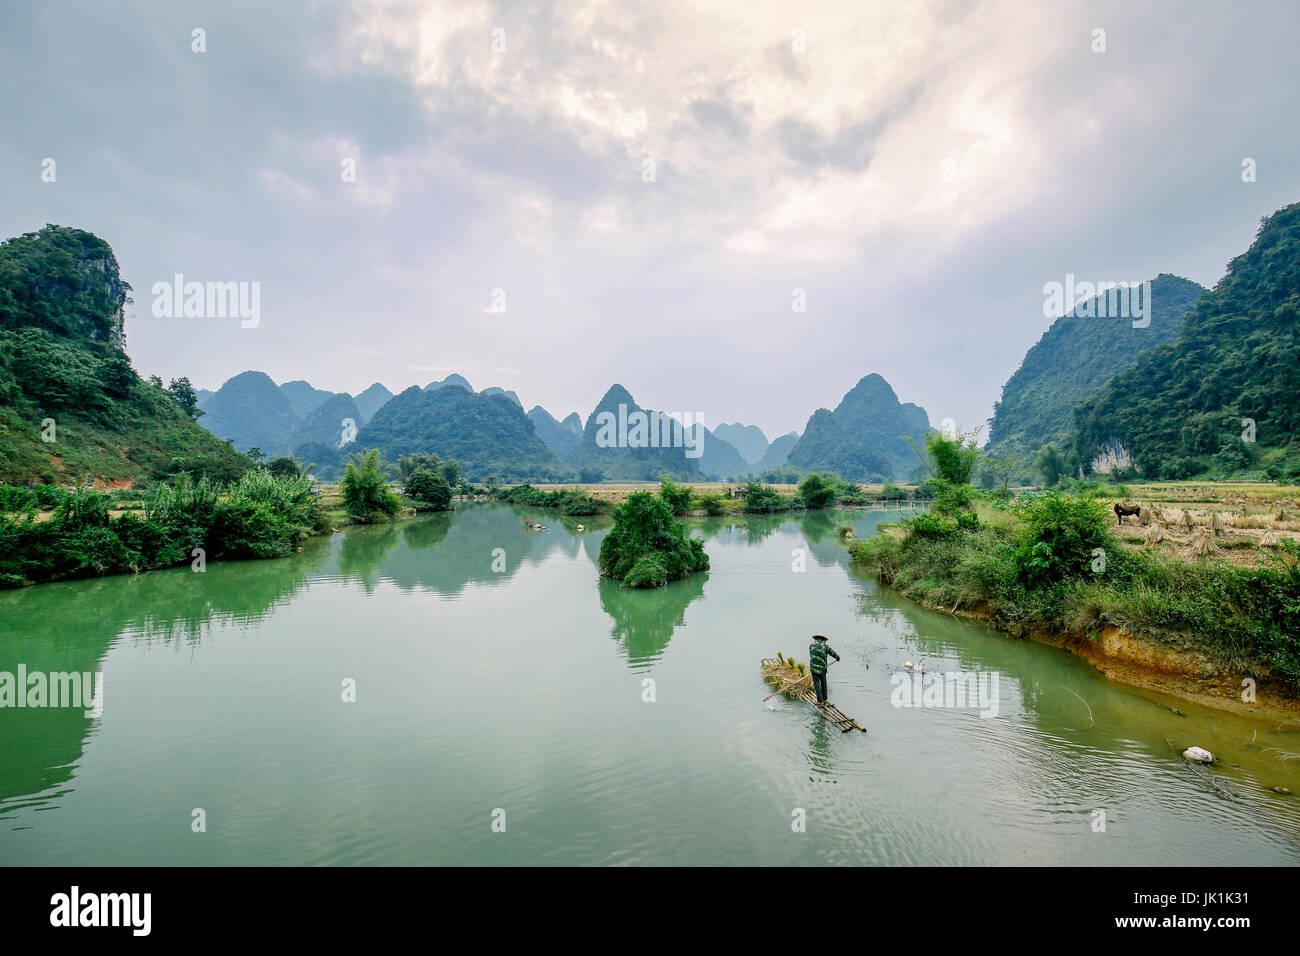 Quay Son river, Trung Khanh town, Cao Bang province Stock Photo